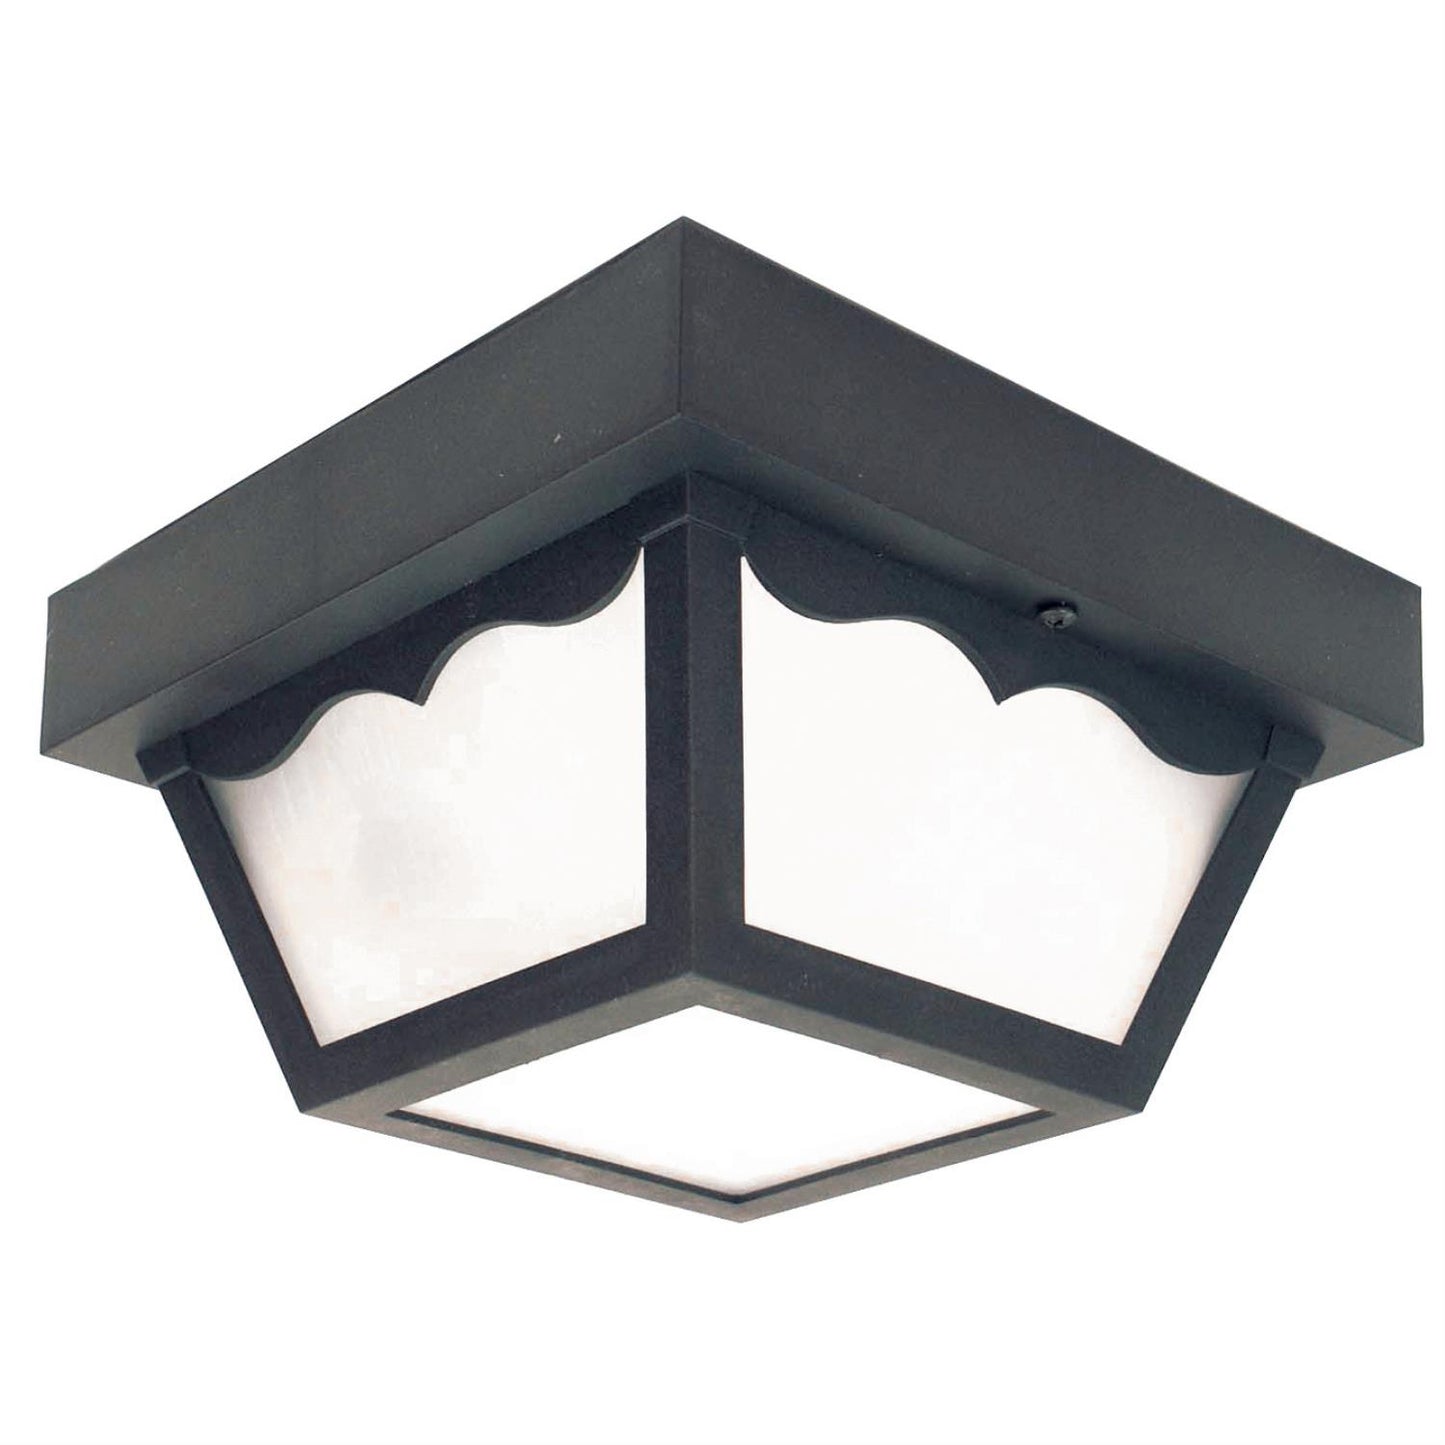 Sunlite Decorative Outdoor Century Collection Fixture, Black Finish, Frosted Lens